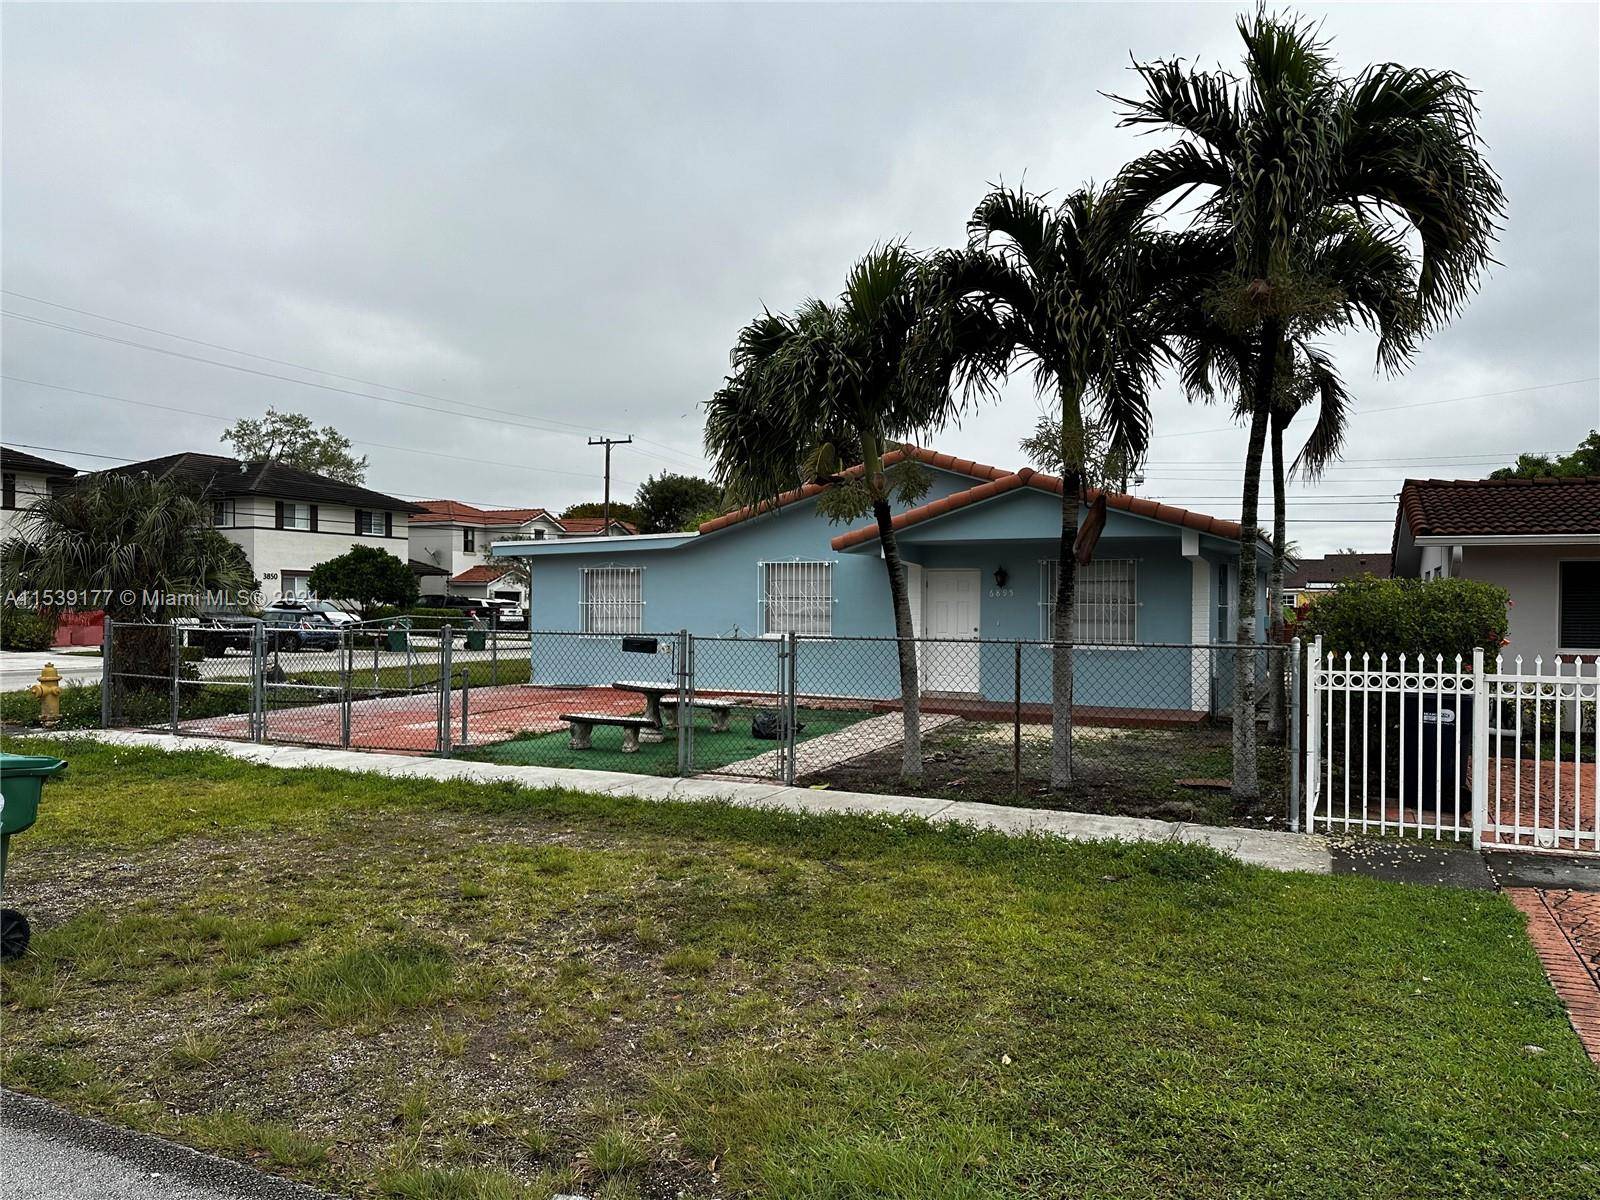 Home in the heart of the desirable Coral Gables neighborhood !